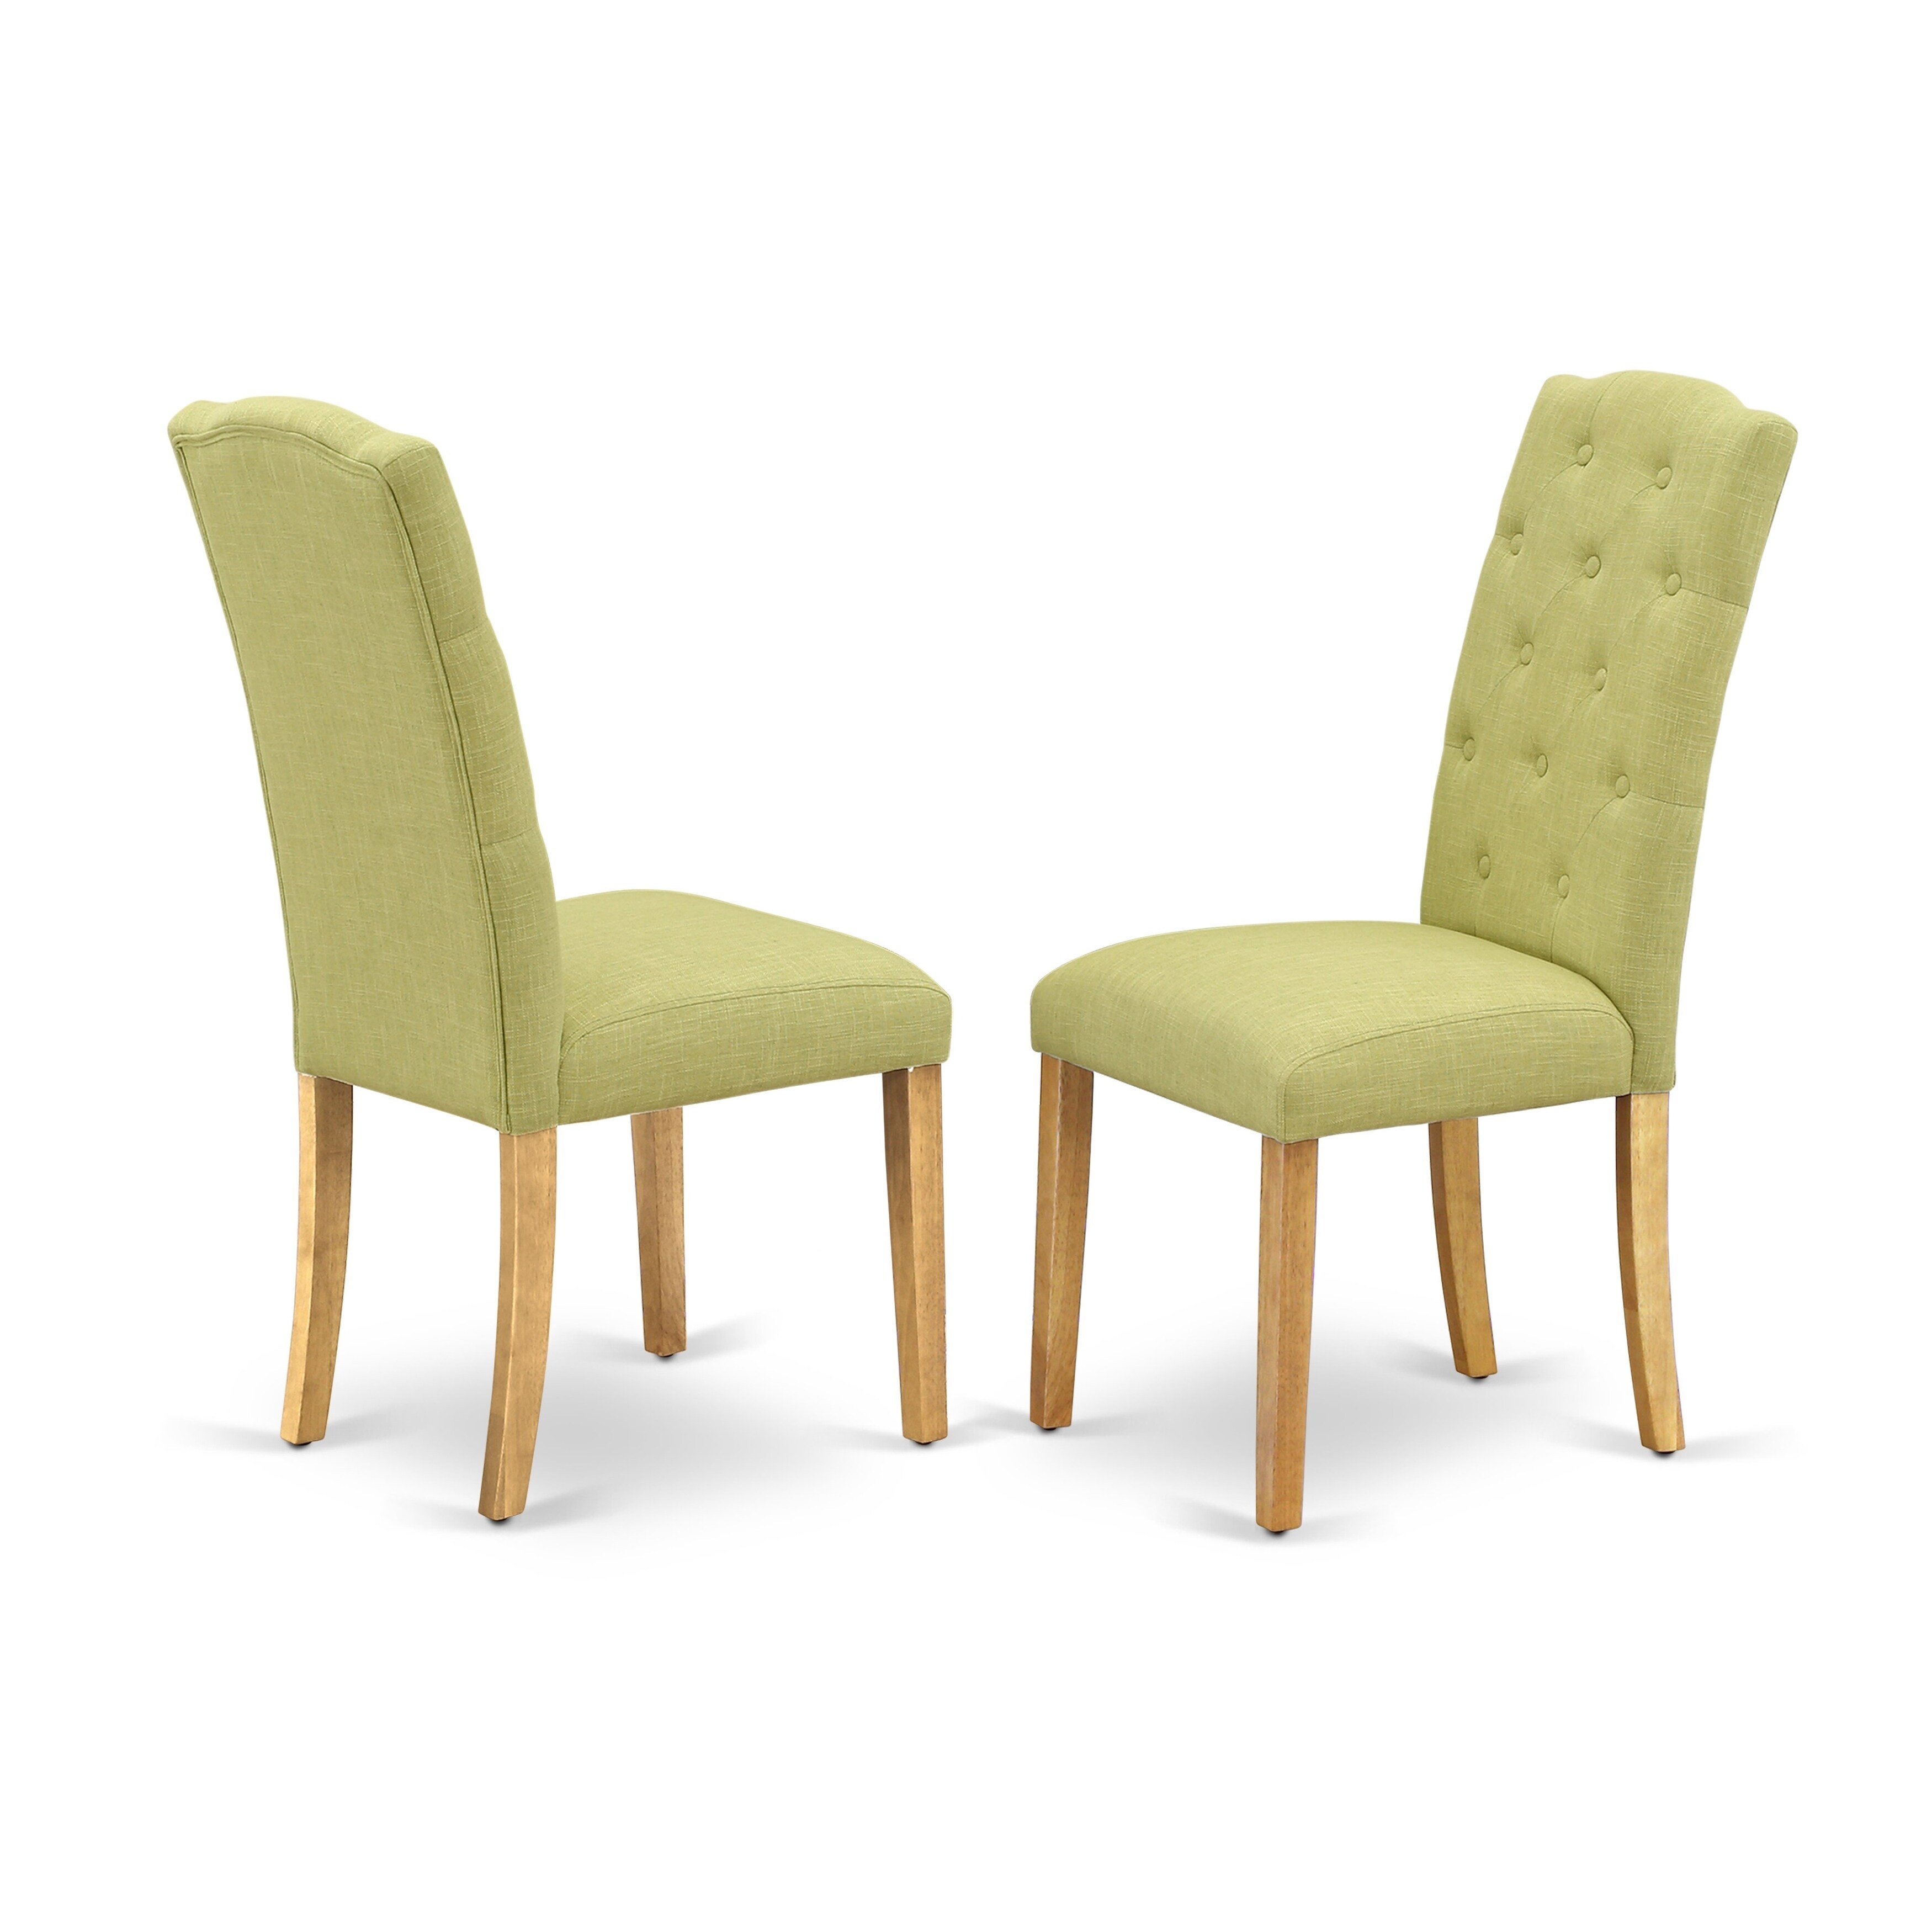 Shop Round Small Table And Parson Chairs In Lime Green Linen